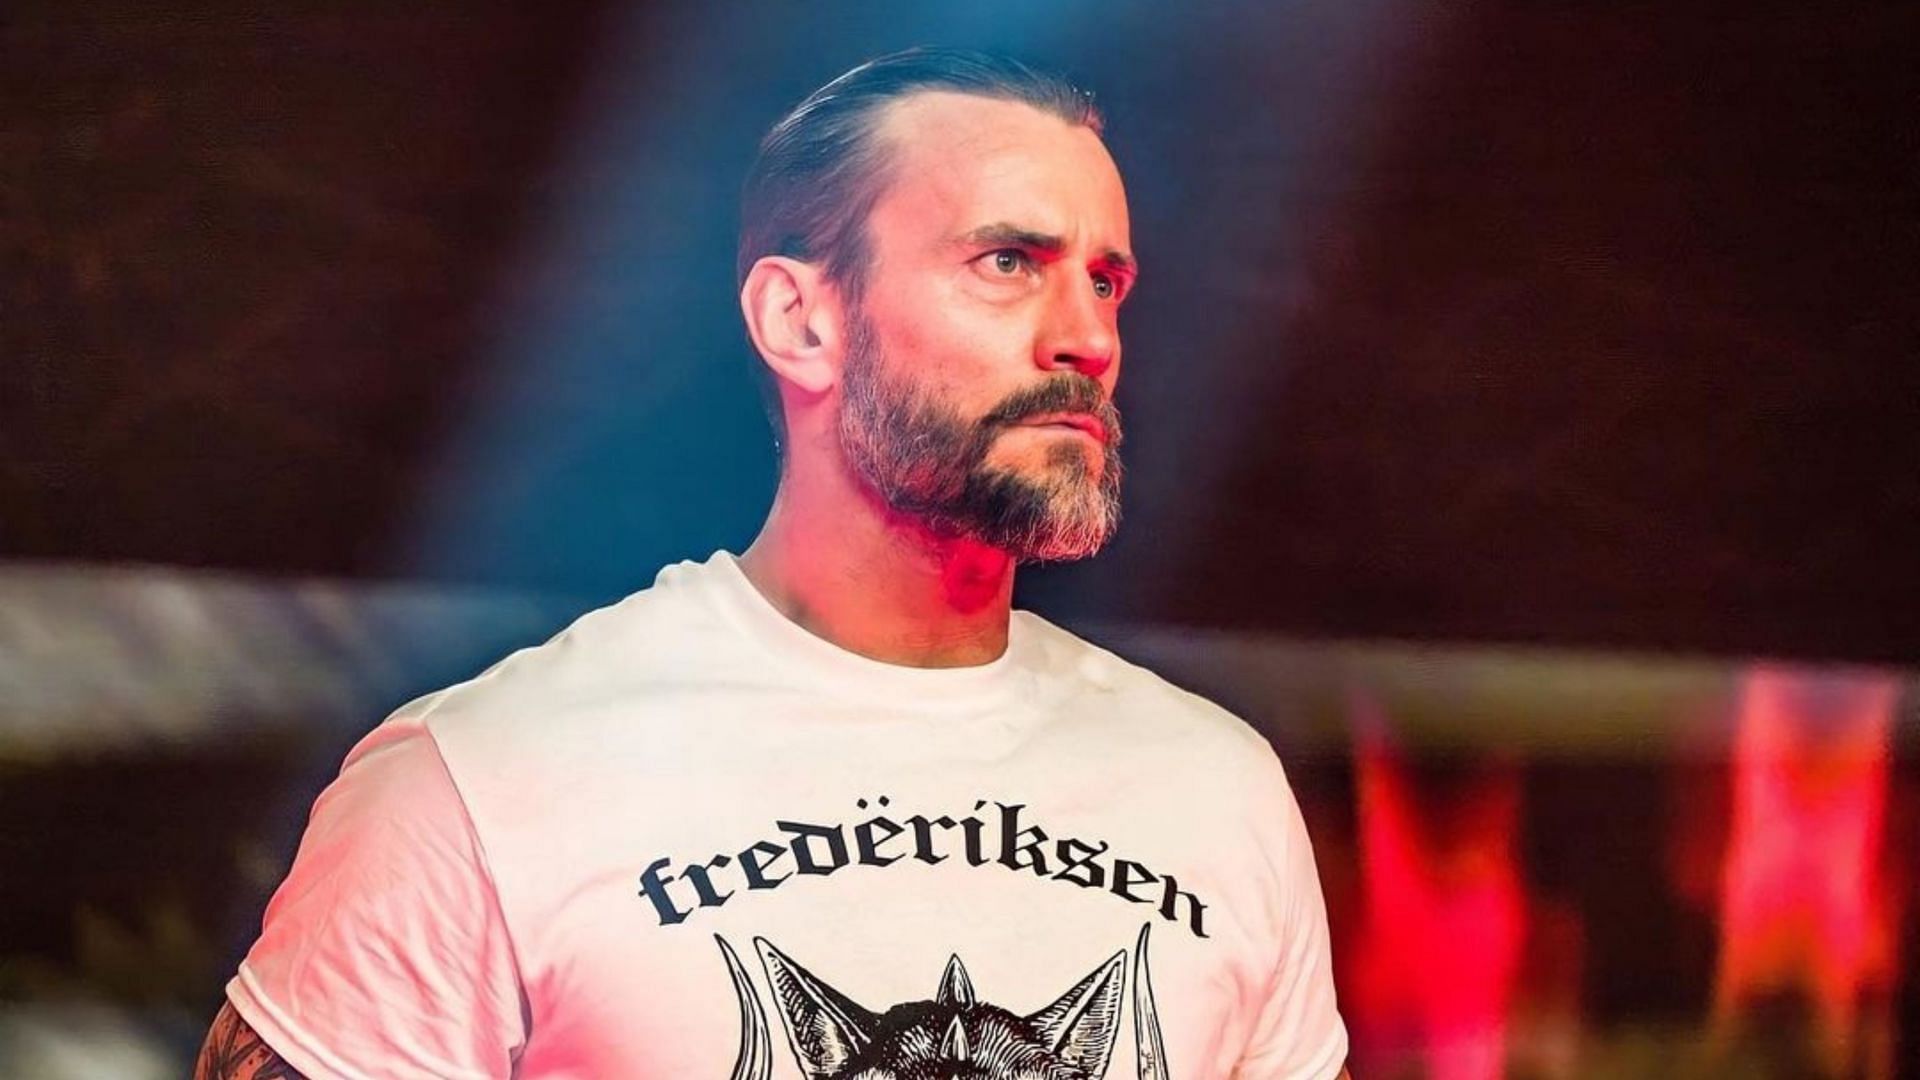 CM Punk was released from WWE in 2014